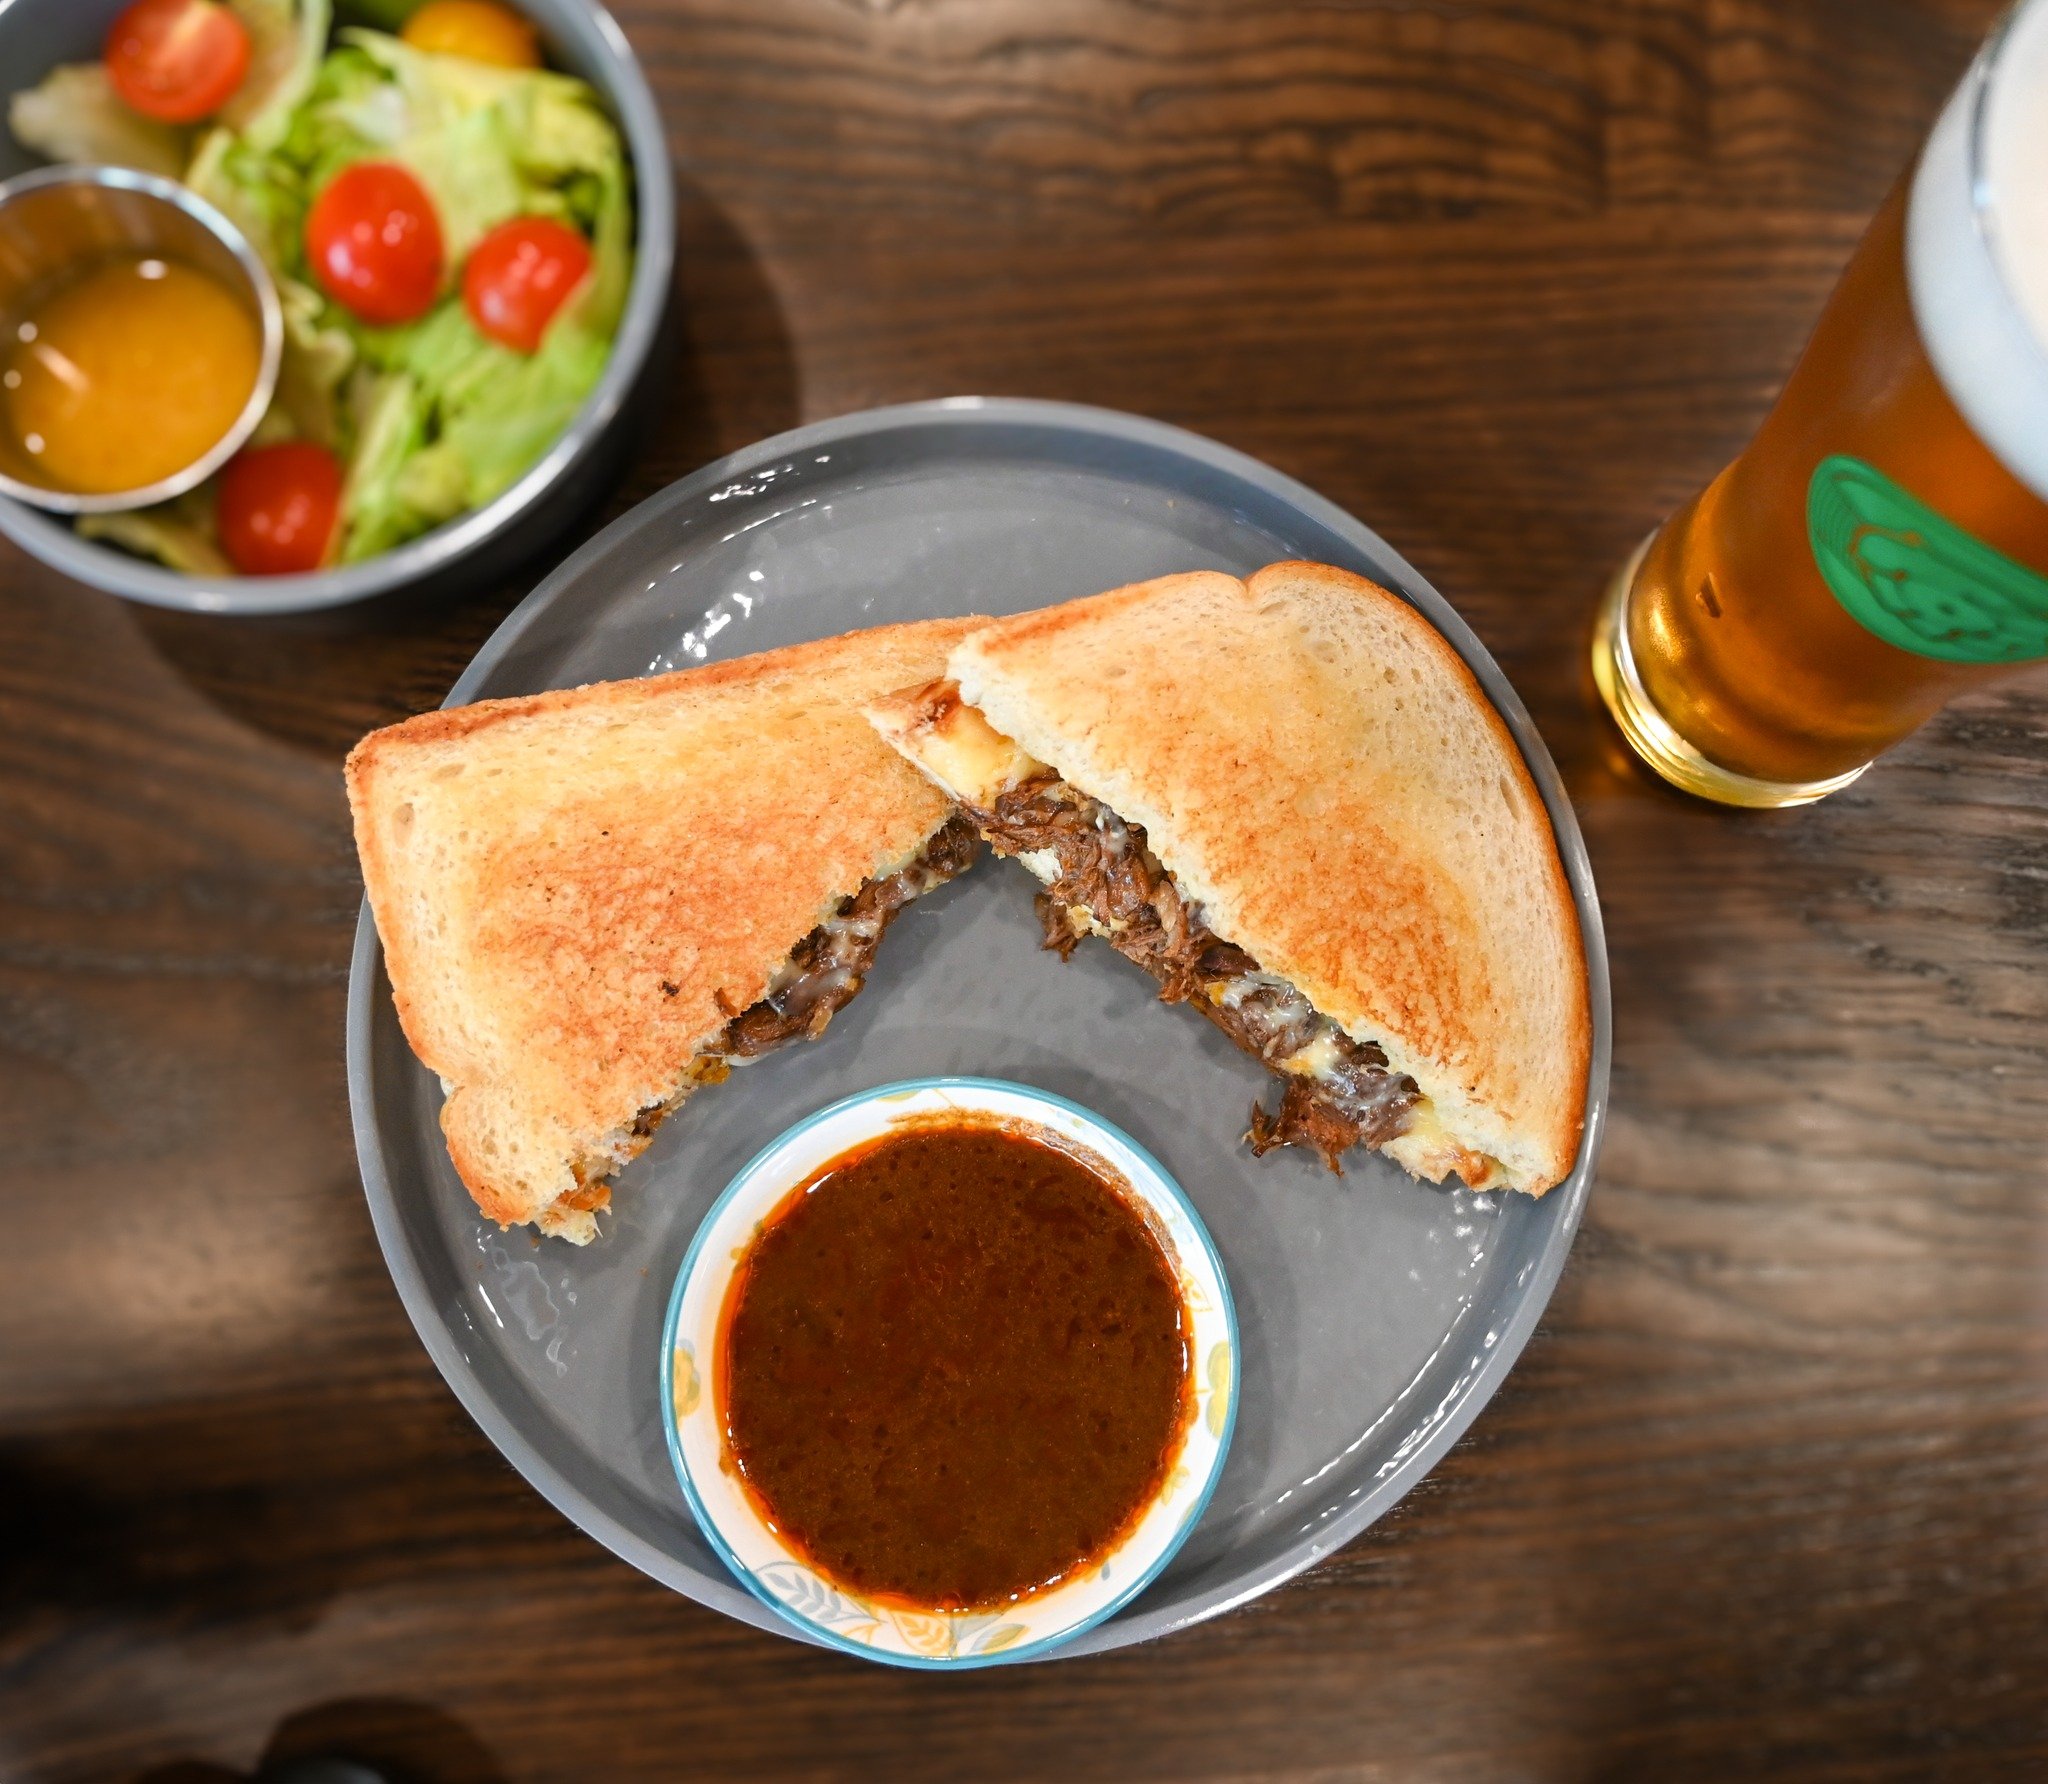 Our Beeria Grilled Cheese is mouth watering! 🤤 Made with White American &amp; Boursin Cheese, Consum&eacute;, Beeria Shredded Beef, all sandwiched between two pieces of Thick Cut White Bread. Add a side salad or fries and a Voss K&ouml;lsch to make 